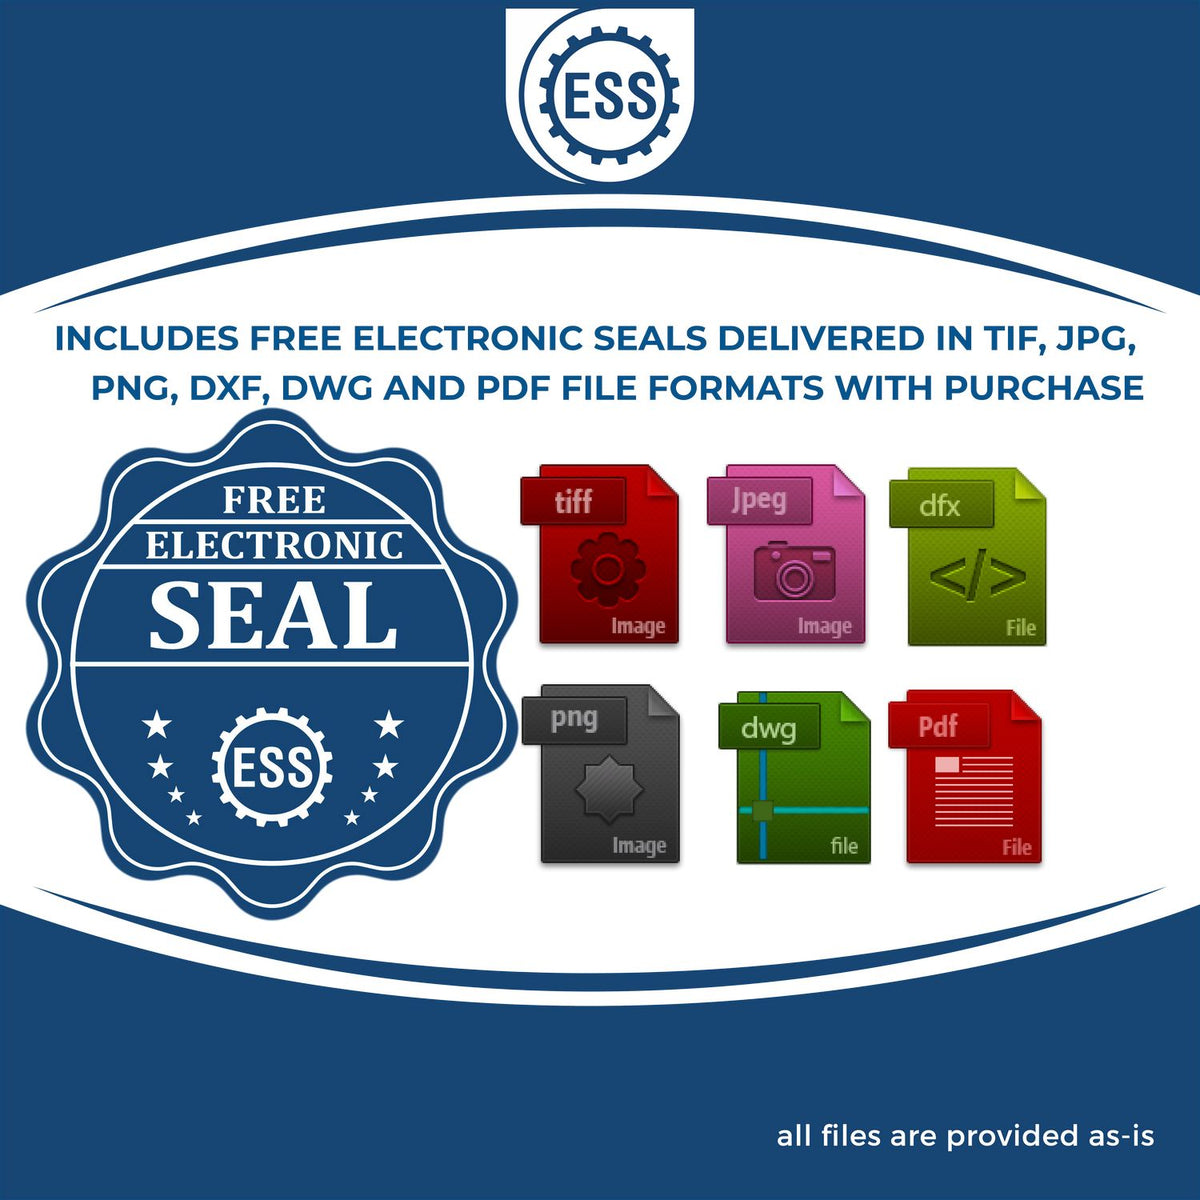 An infographic for the free electronic seal for the Self-Inking District of Columbia PE Stamp illustrating the different file type icons such as DXF, DWG, TIF, JPG and PNG.